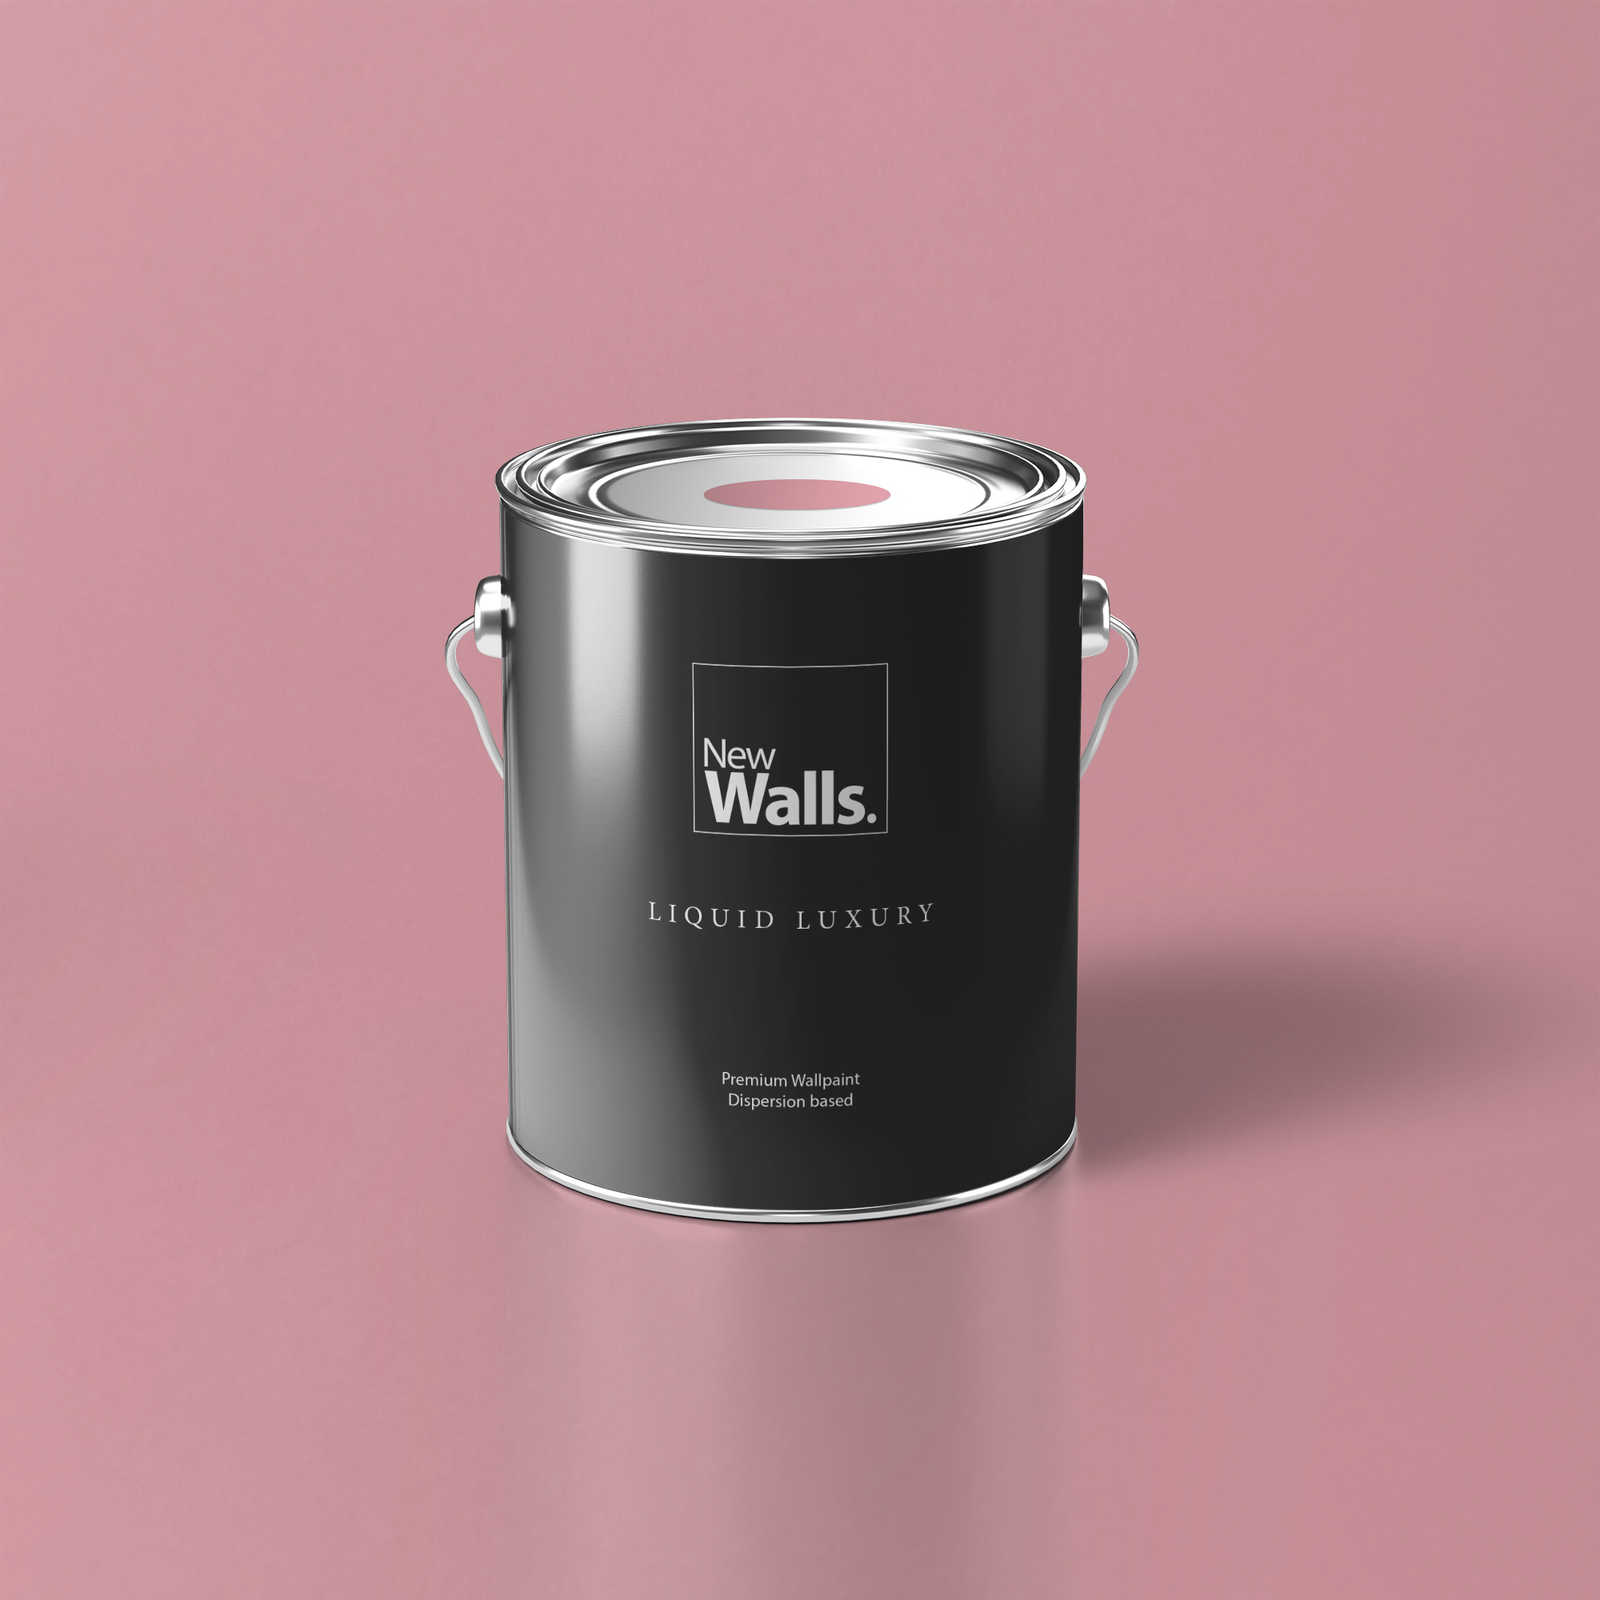 Premium Wall Paint cheerful baby pink »Blooming Blossom« NW1017 – 5 litre
